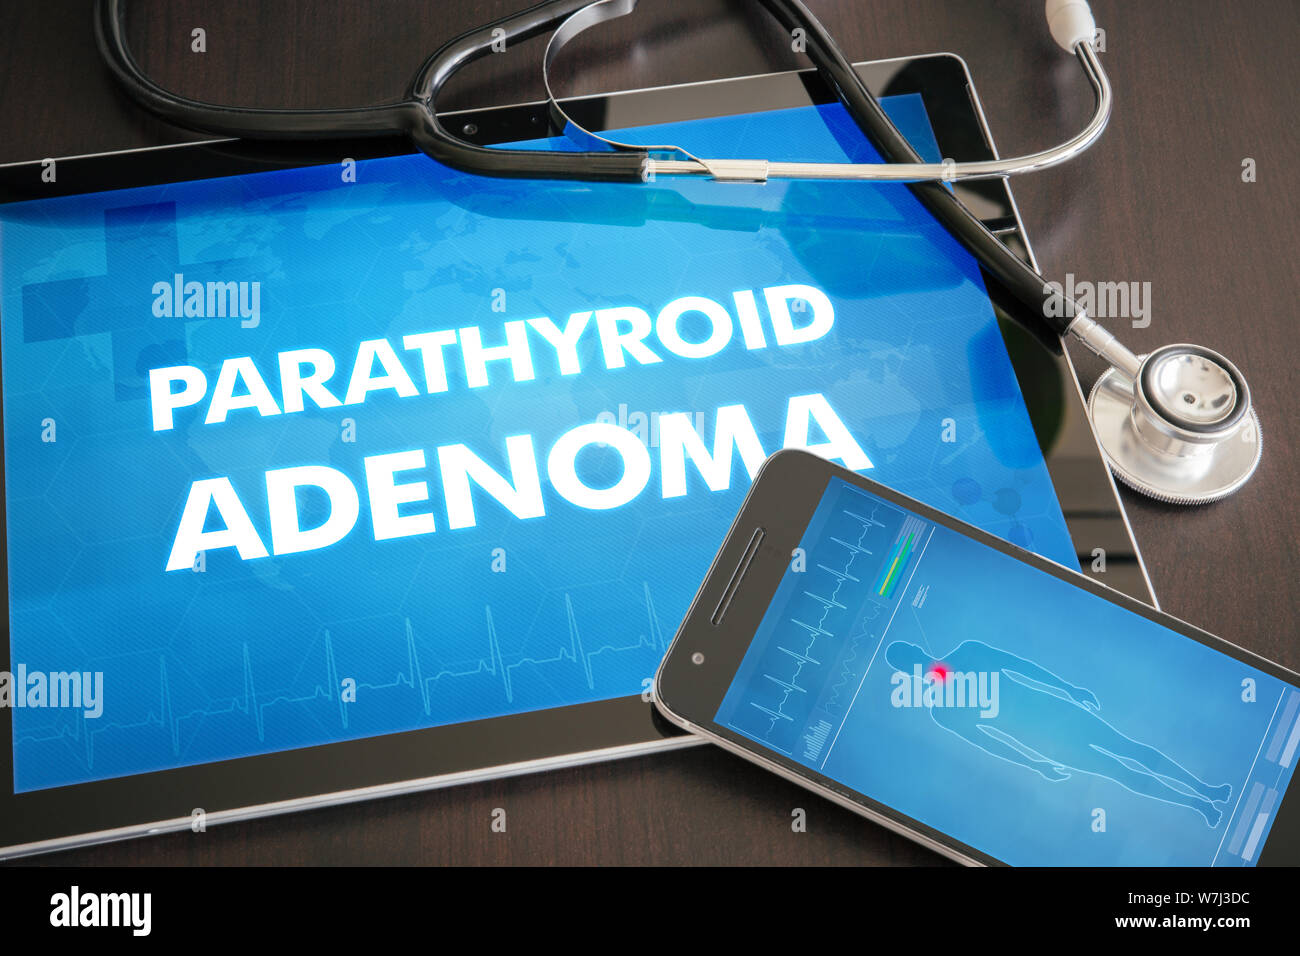 Parathyroid adenoma (endocrine disease) diagnosis medical concept on tablet screen with stethoscope. Stock Photo